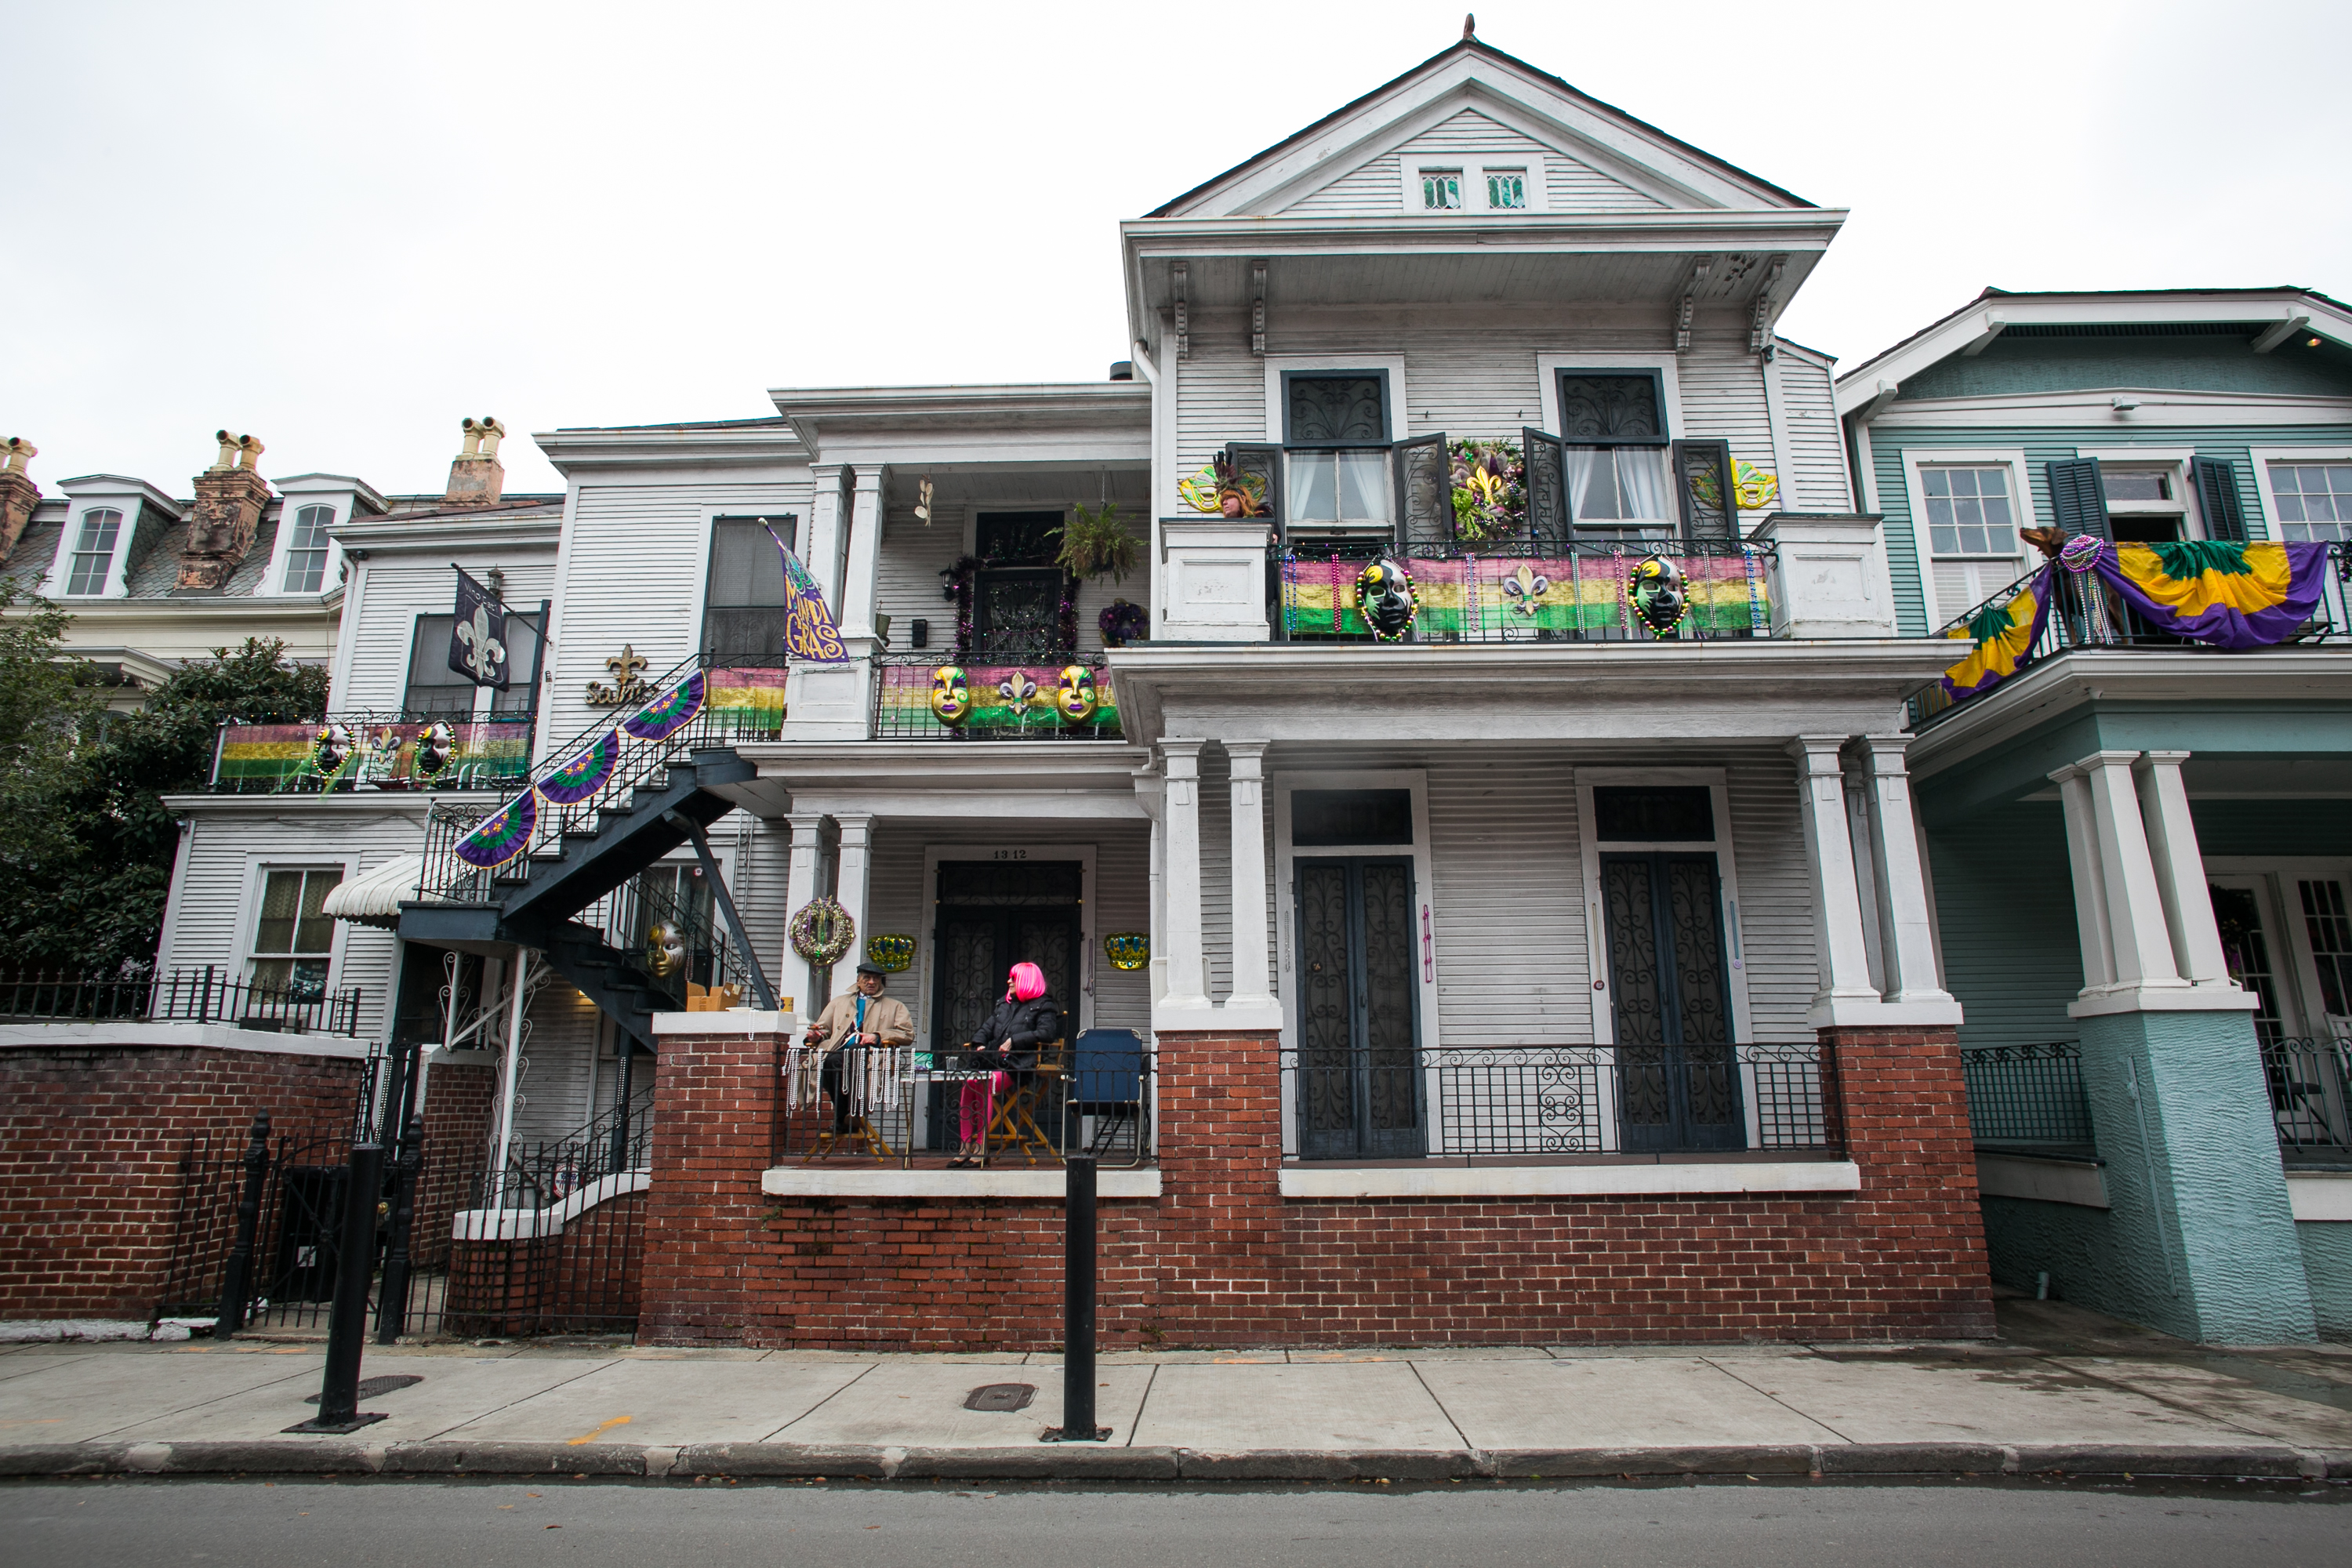 New Orleans Takes To The Streets To Celebrate Mardi Gras